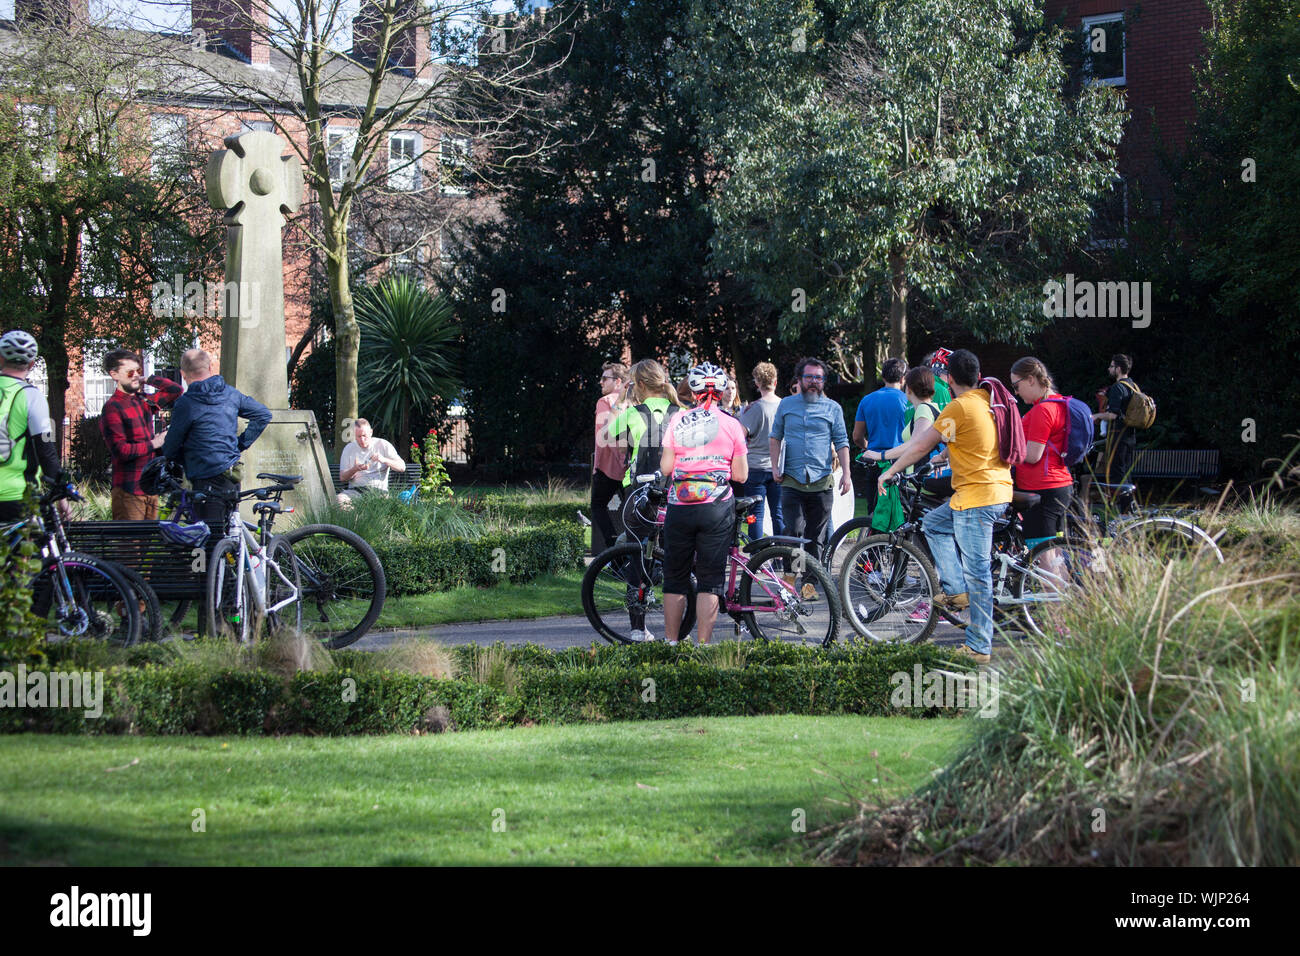 Group of cyclists in a park Stock Photo